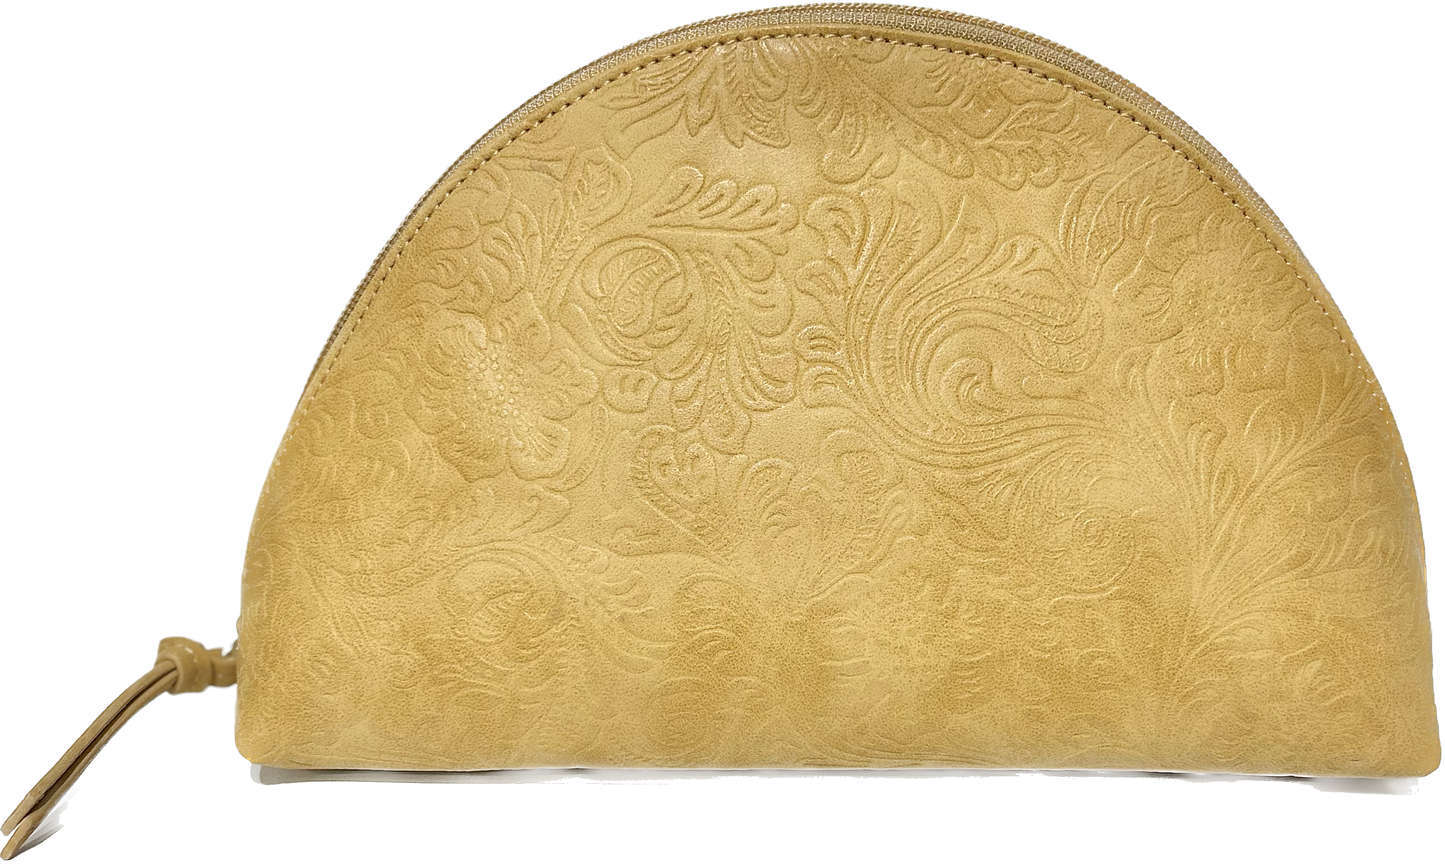 Tooled Leather Cosmetic Bags